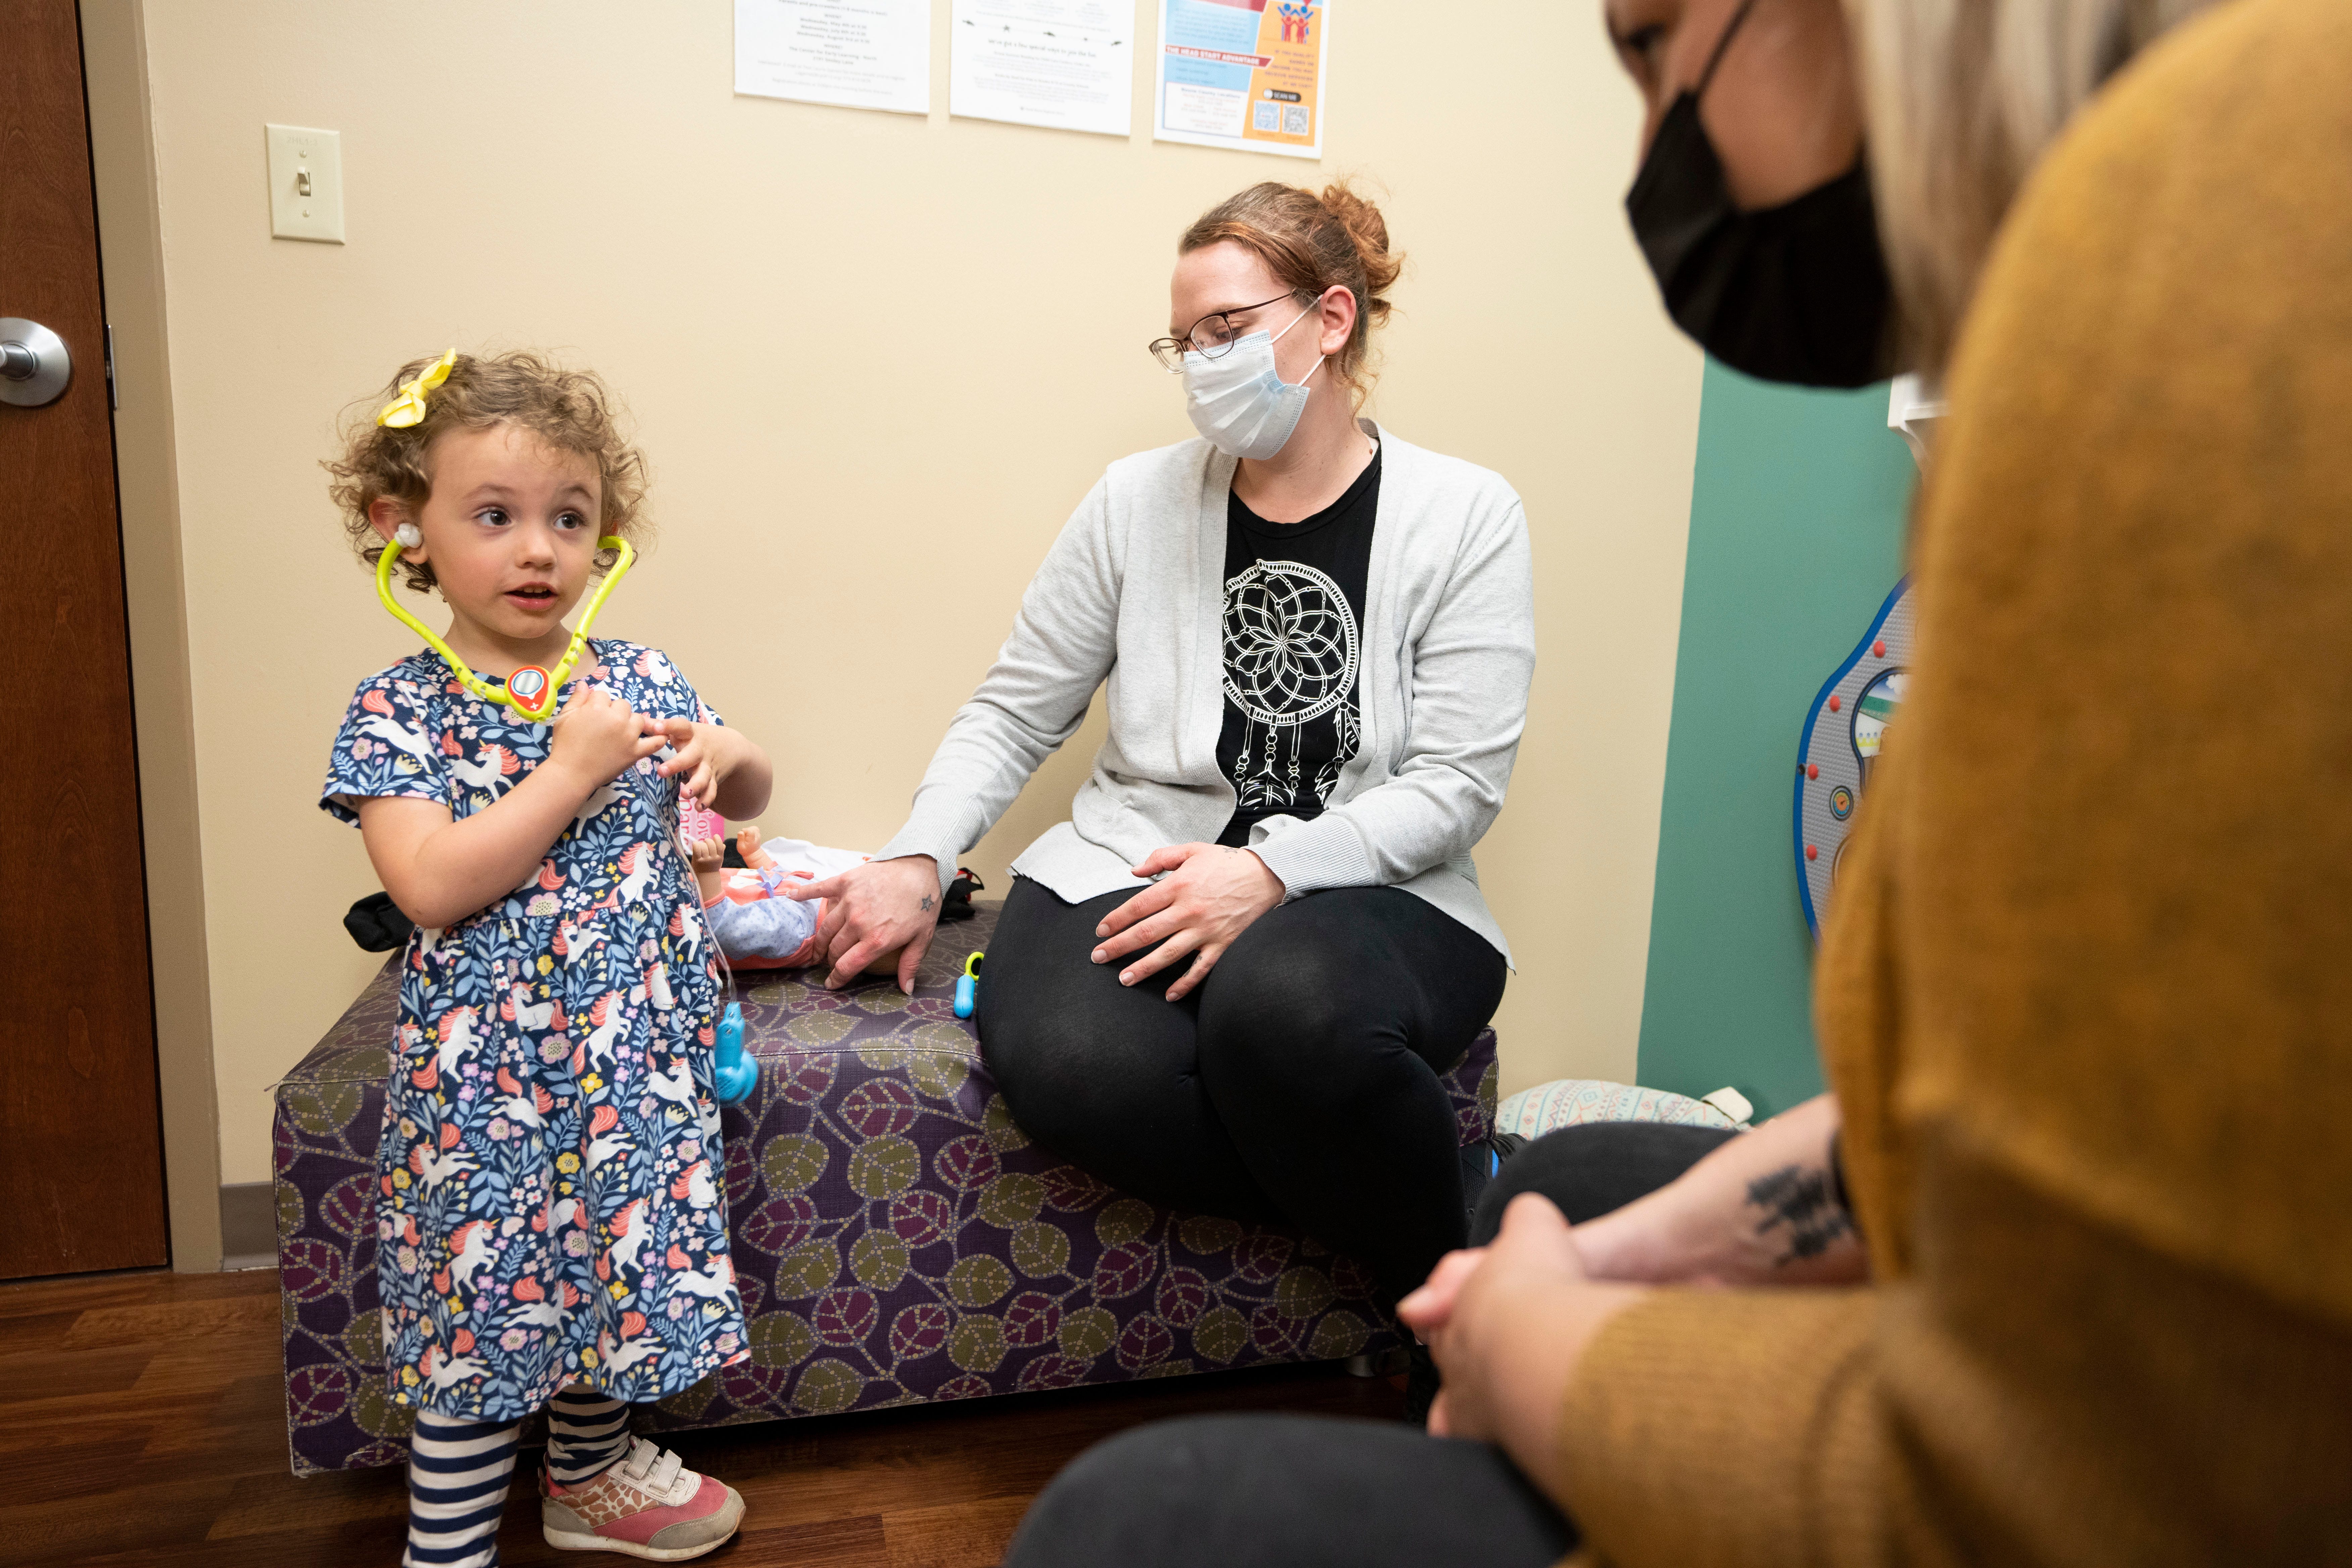 HealthySteps specialist Andrea Pauley accompanies Nylah Mancuso, 3, and her mother. Jessica Mahurin, during Nylah’s checkup at the University of Missouri on April 28 in Columbia.